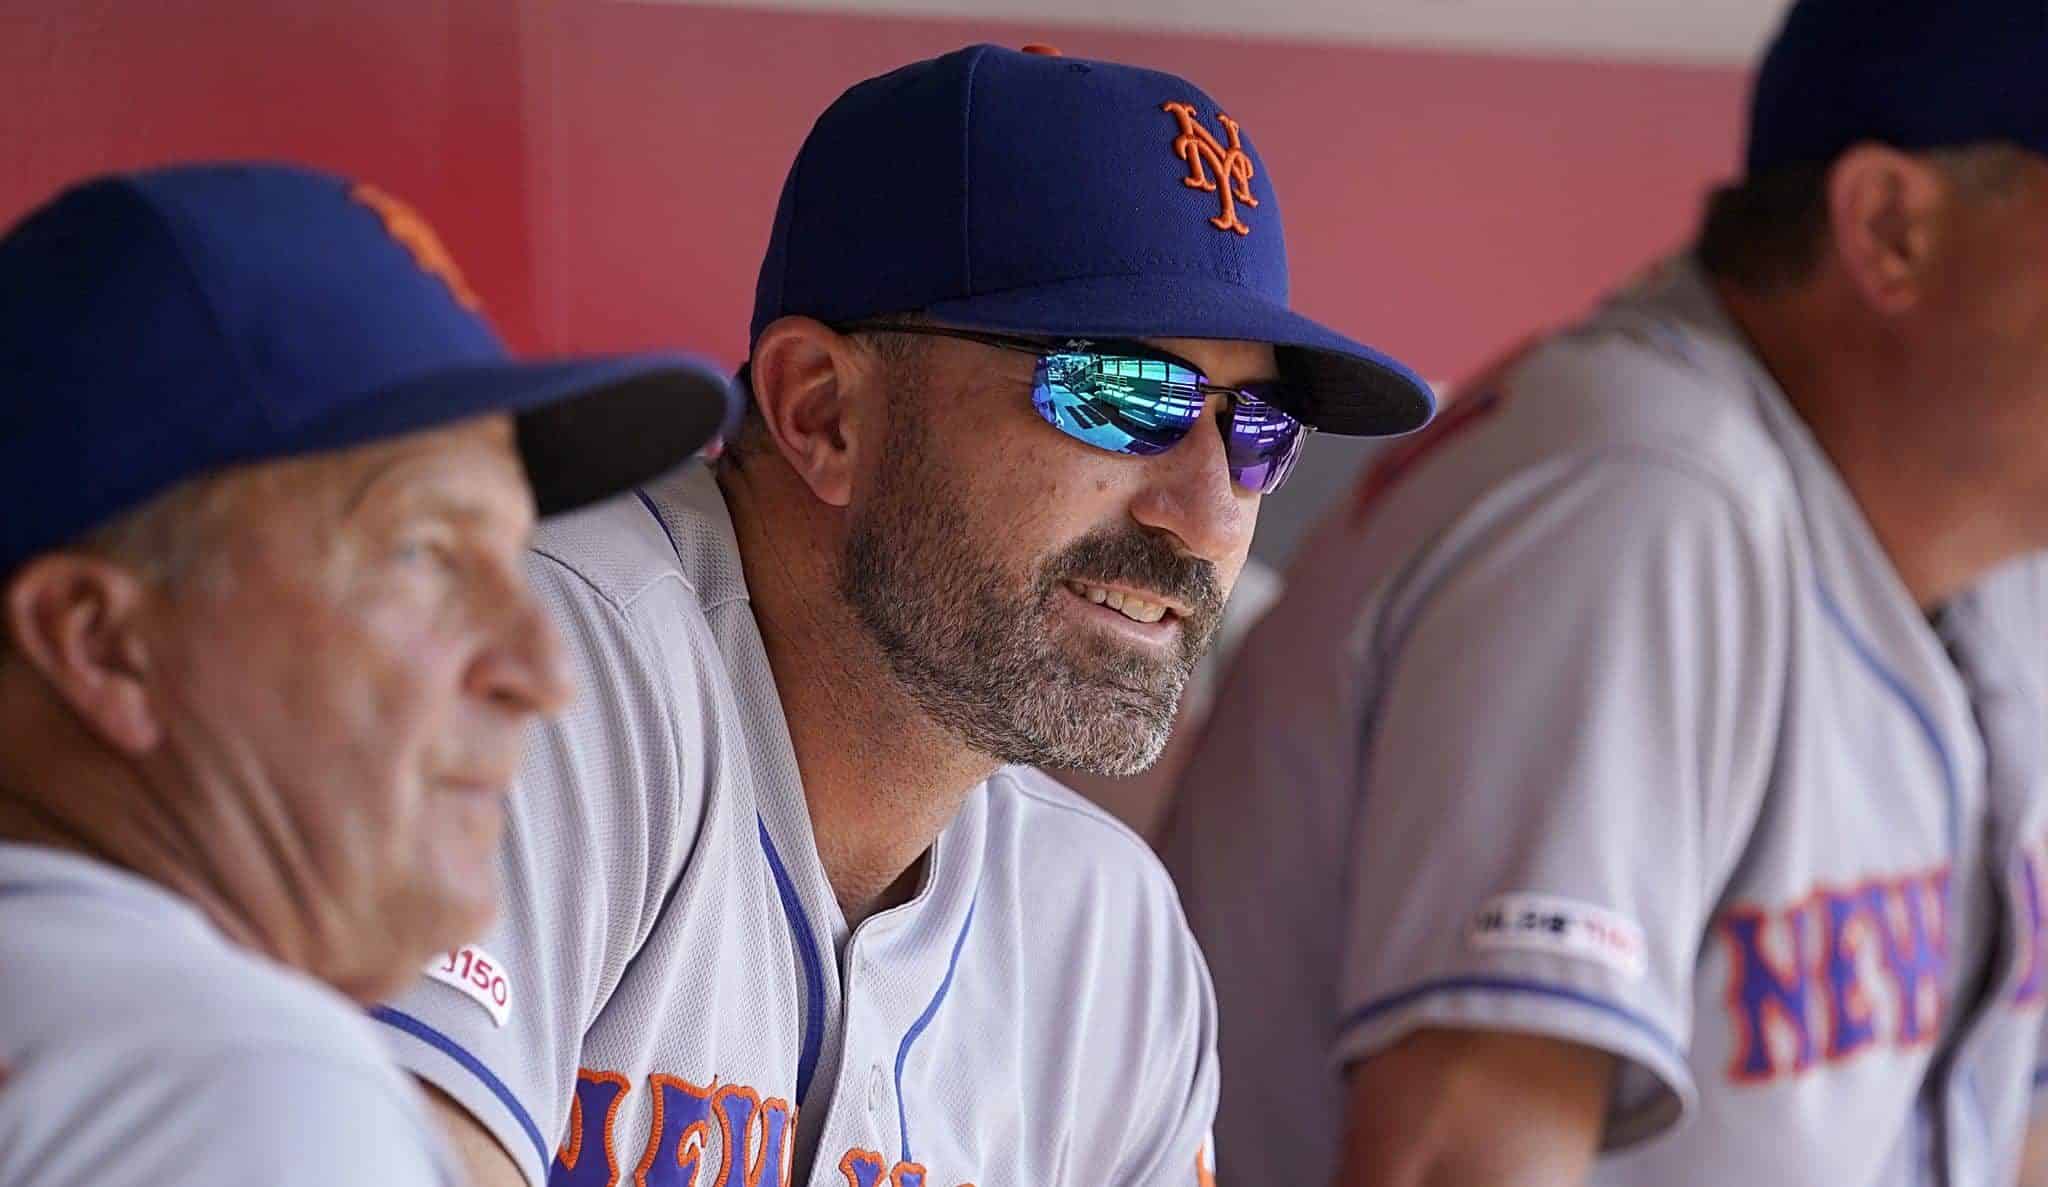 CINCINNATI, OHIO - SEPTEMBER 22: Mickey Callaway #36 manager of the New York Mets sits in the dugout during the game against the Cincinnati Reds at Great American Ball Park on September 22, 2019 in Cincinnati, Ohio.